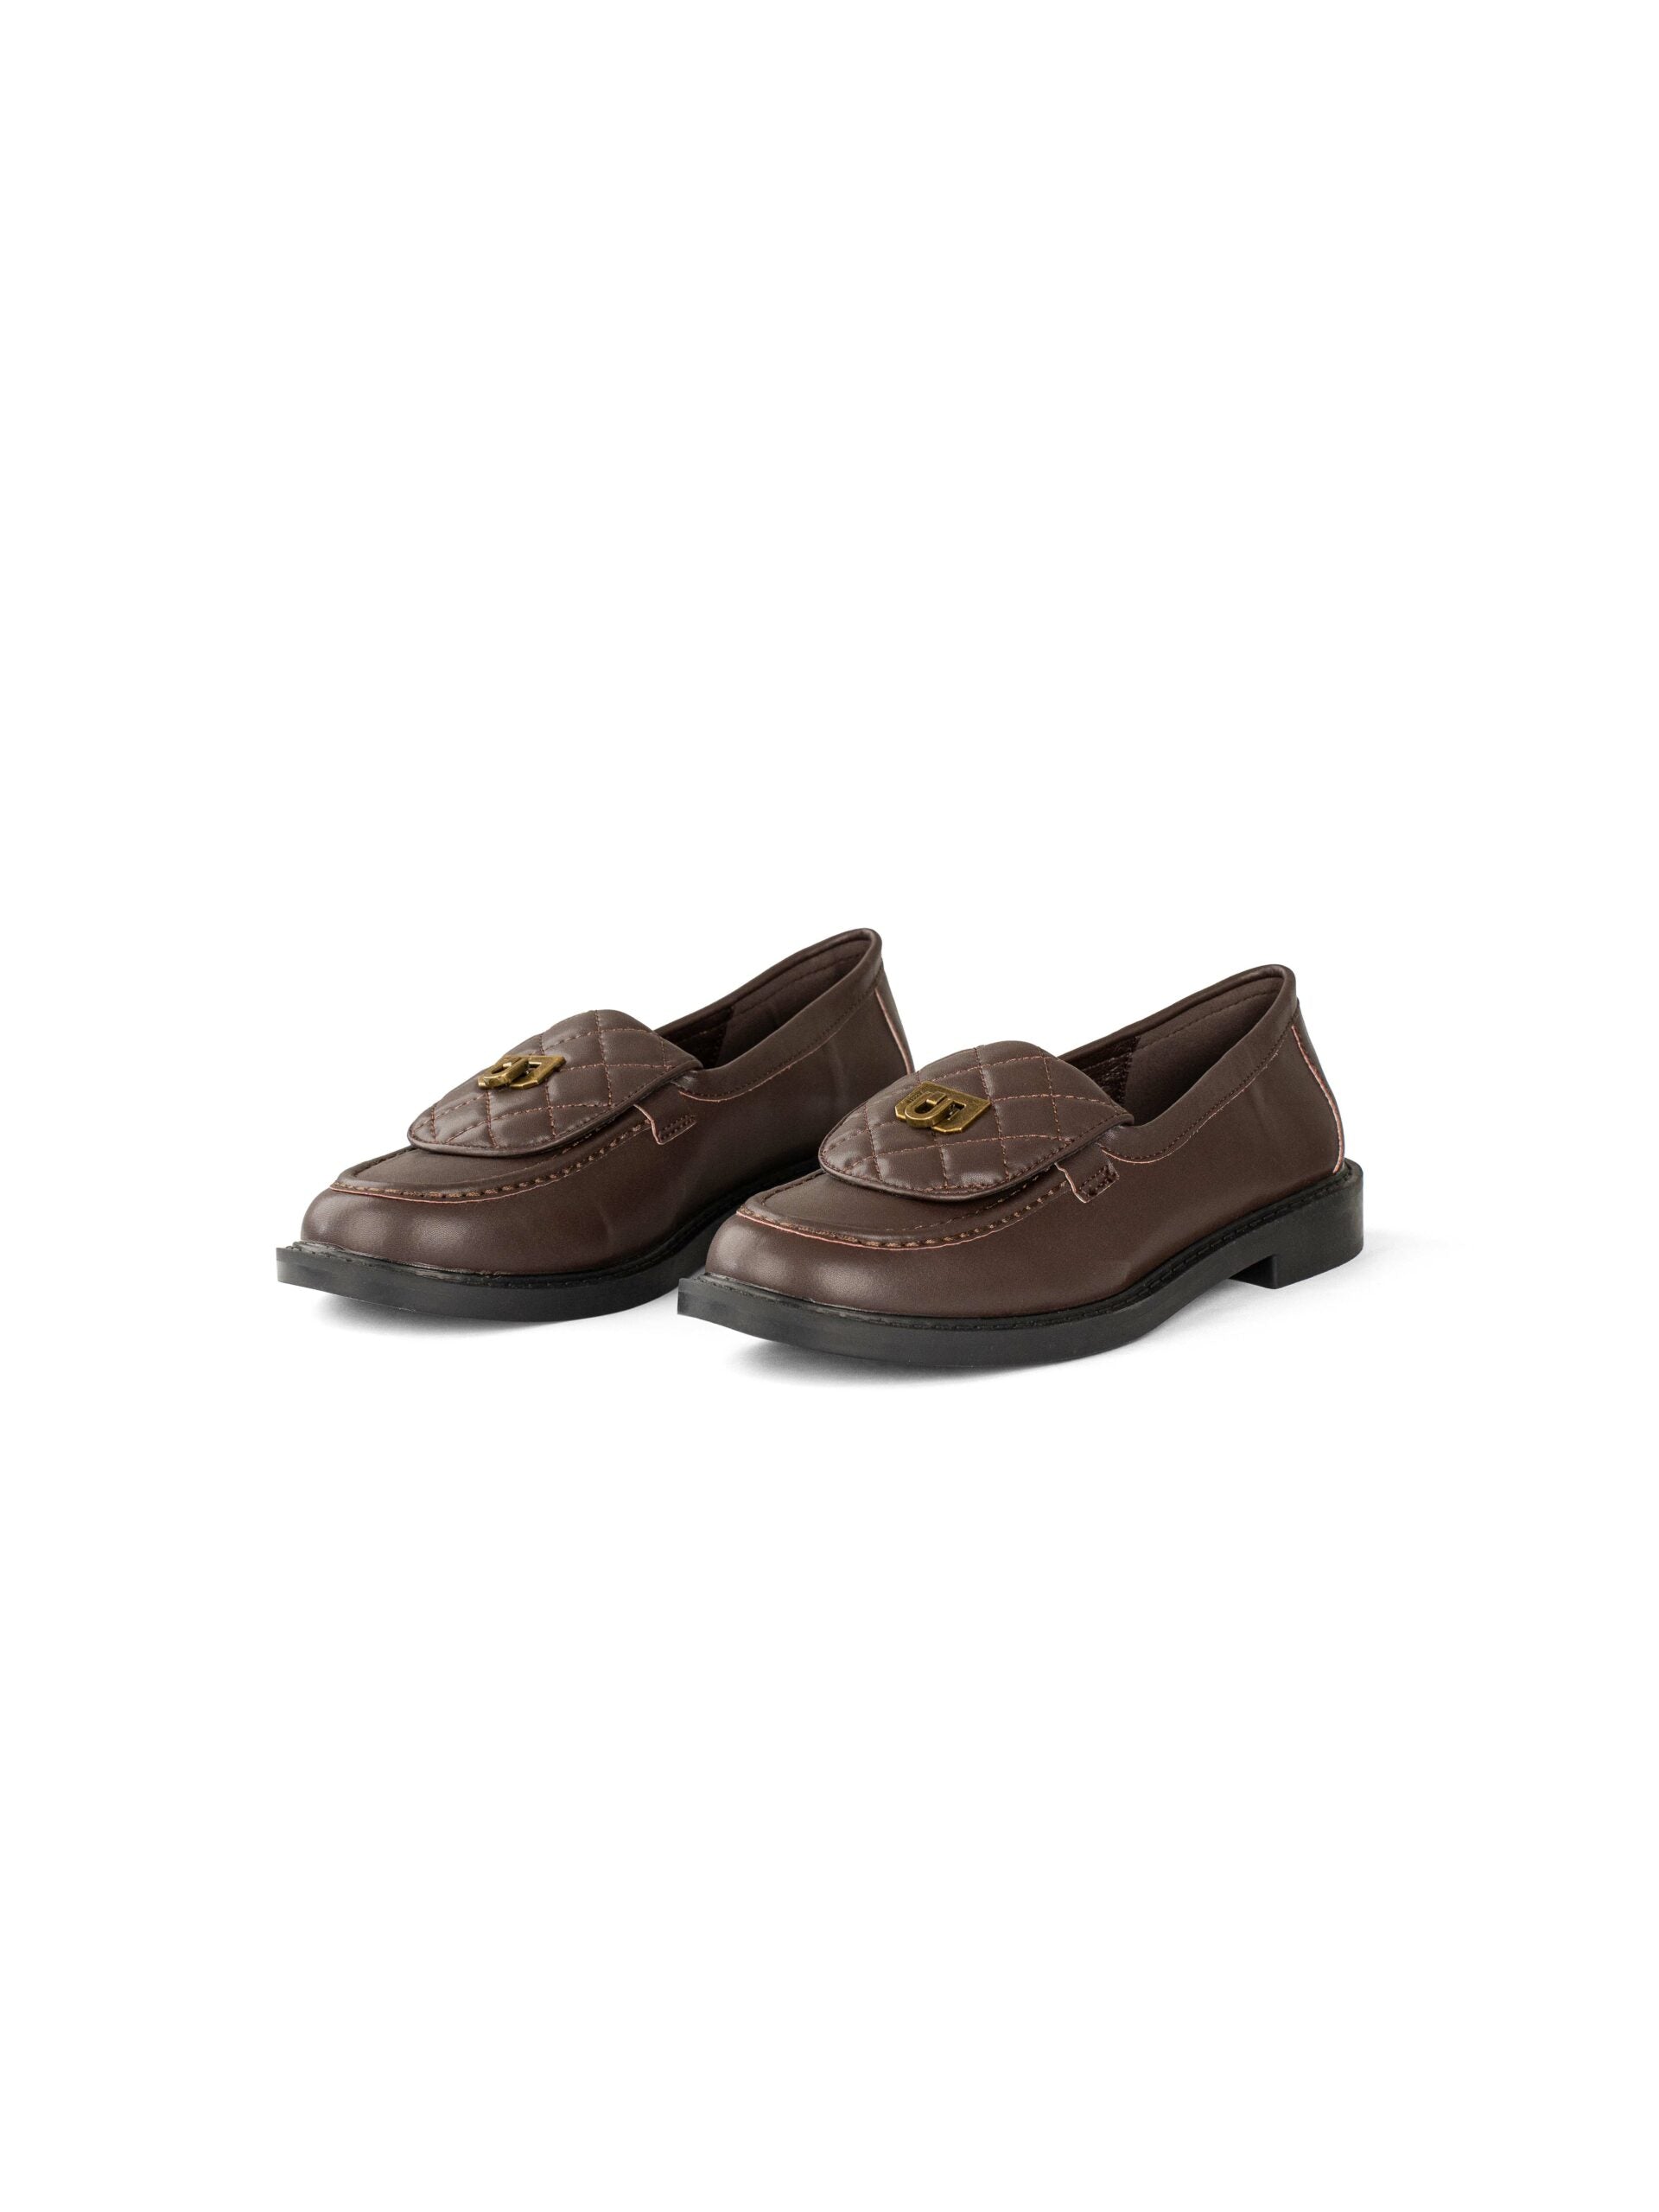 Marick Collection BROWN